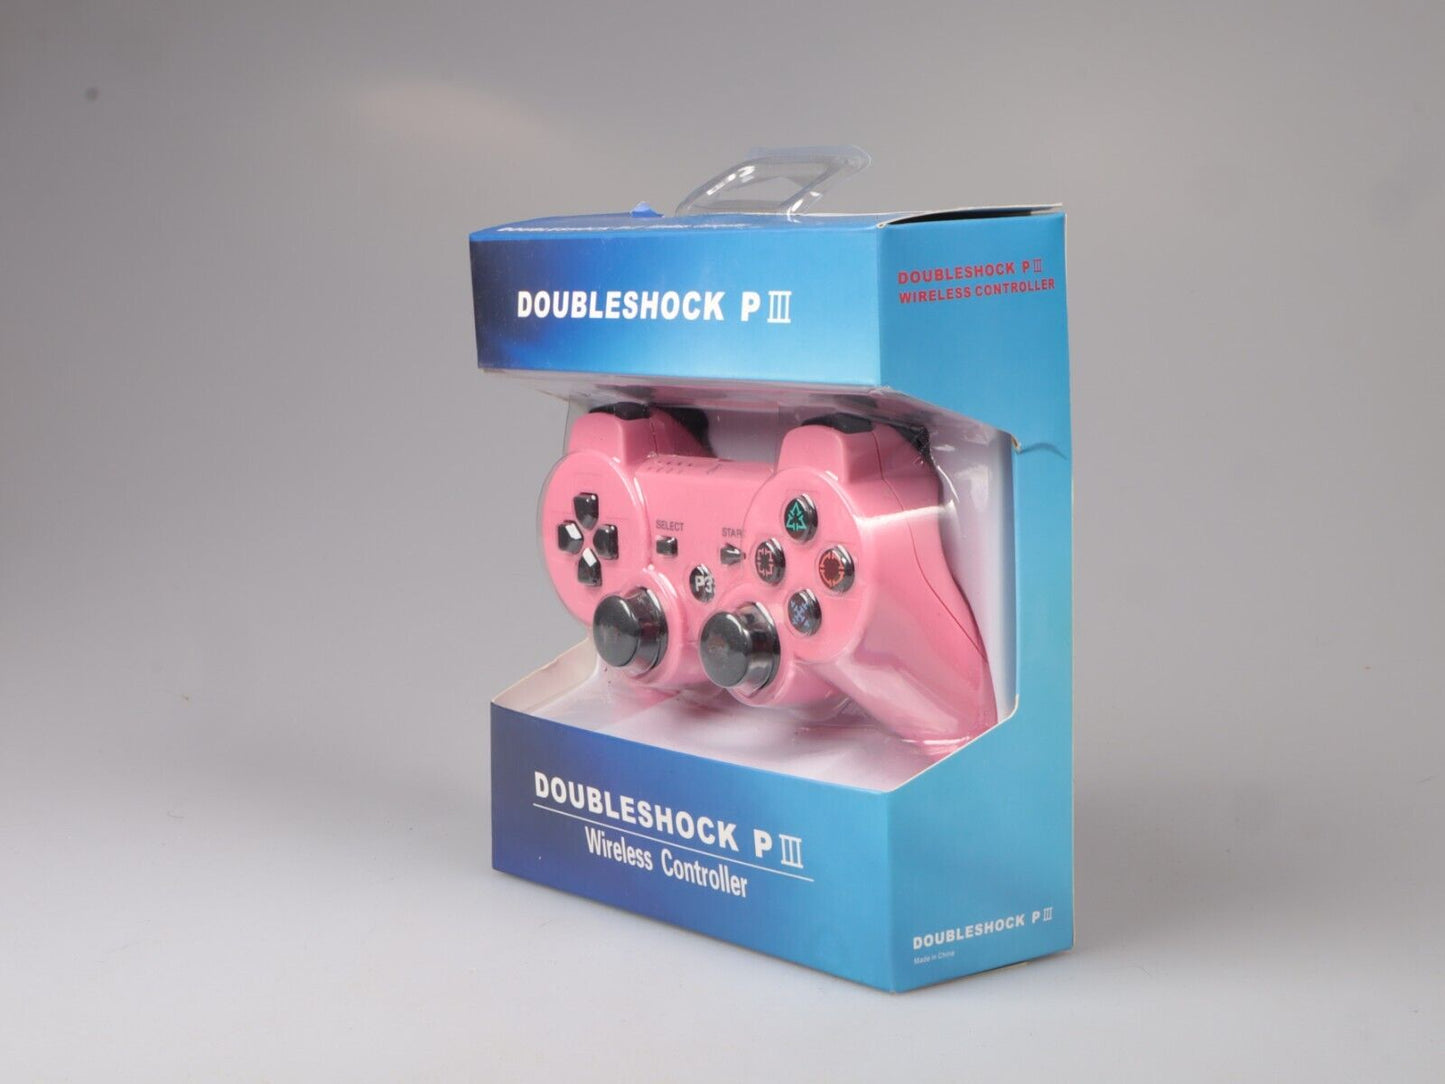 Doubleshock Playstation 3 Controller | Wireless Controller | Pink